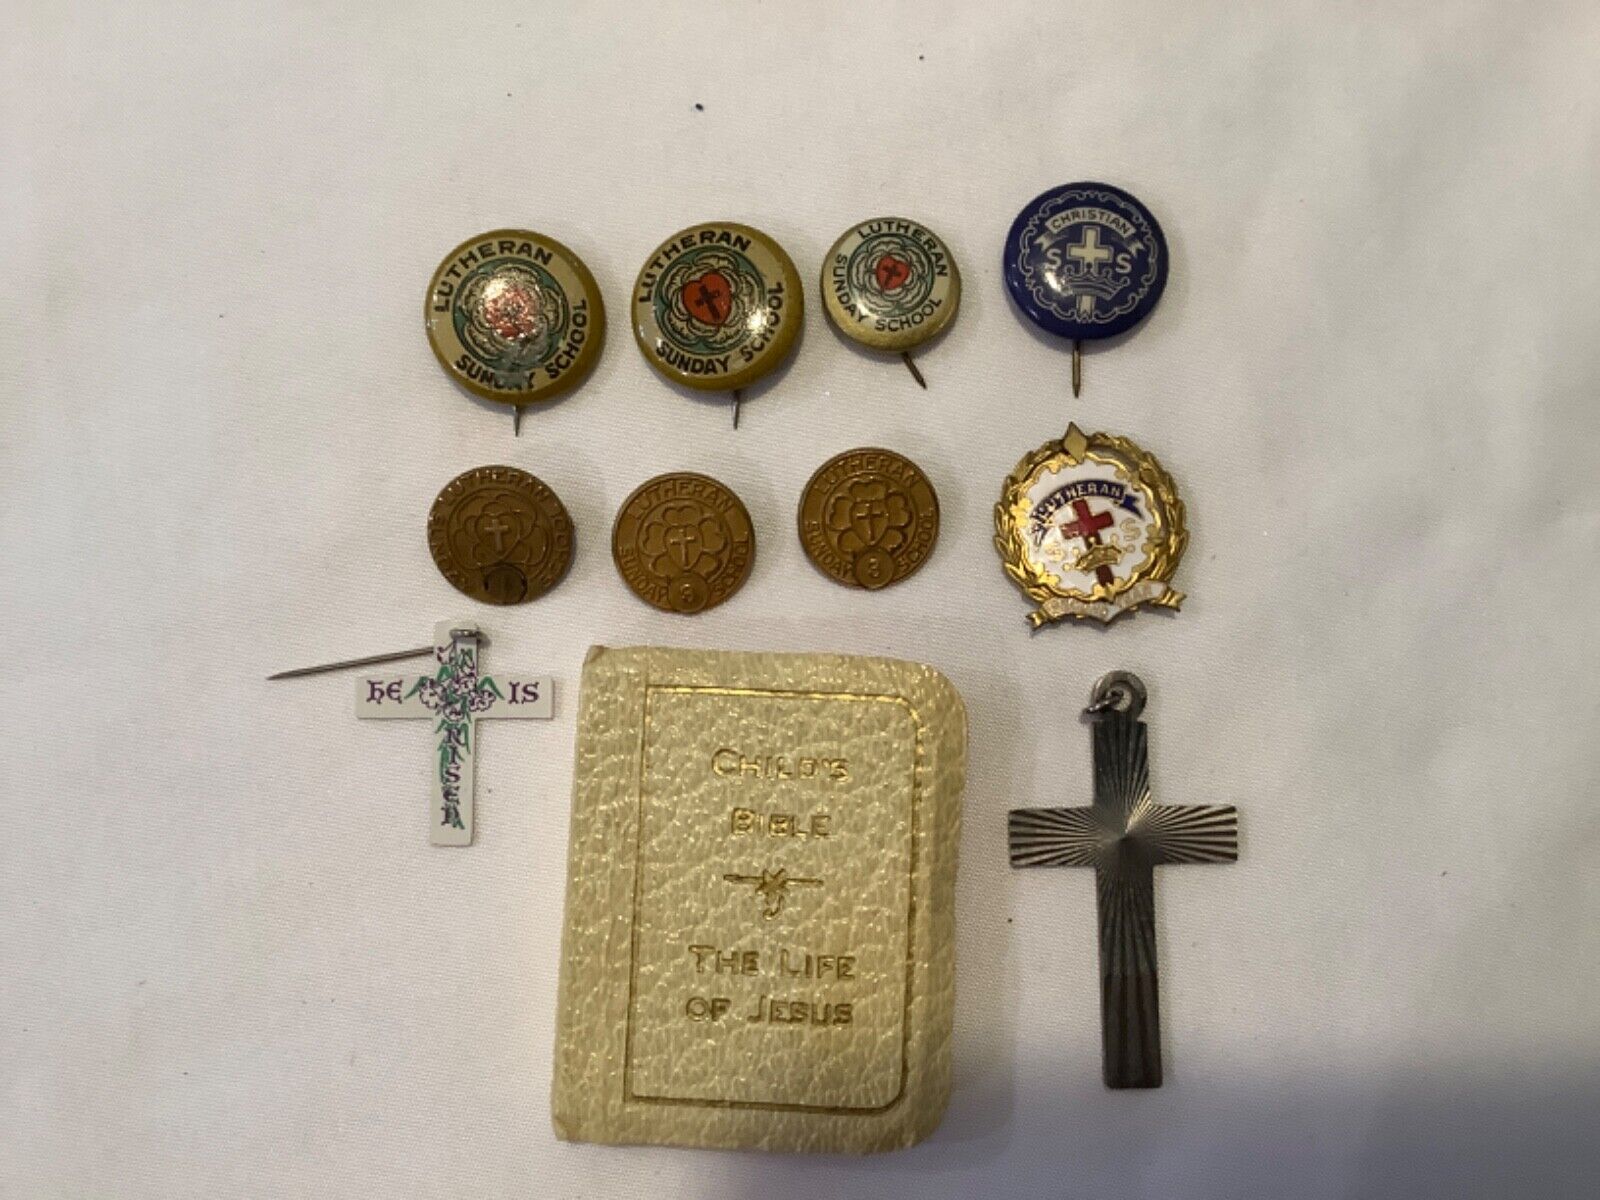 VINTAGE Lot of 11 Lutheran Religious Sunday School Pins Children's Bible +More